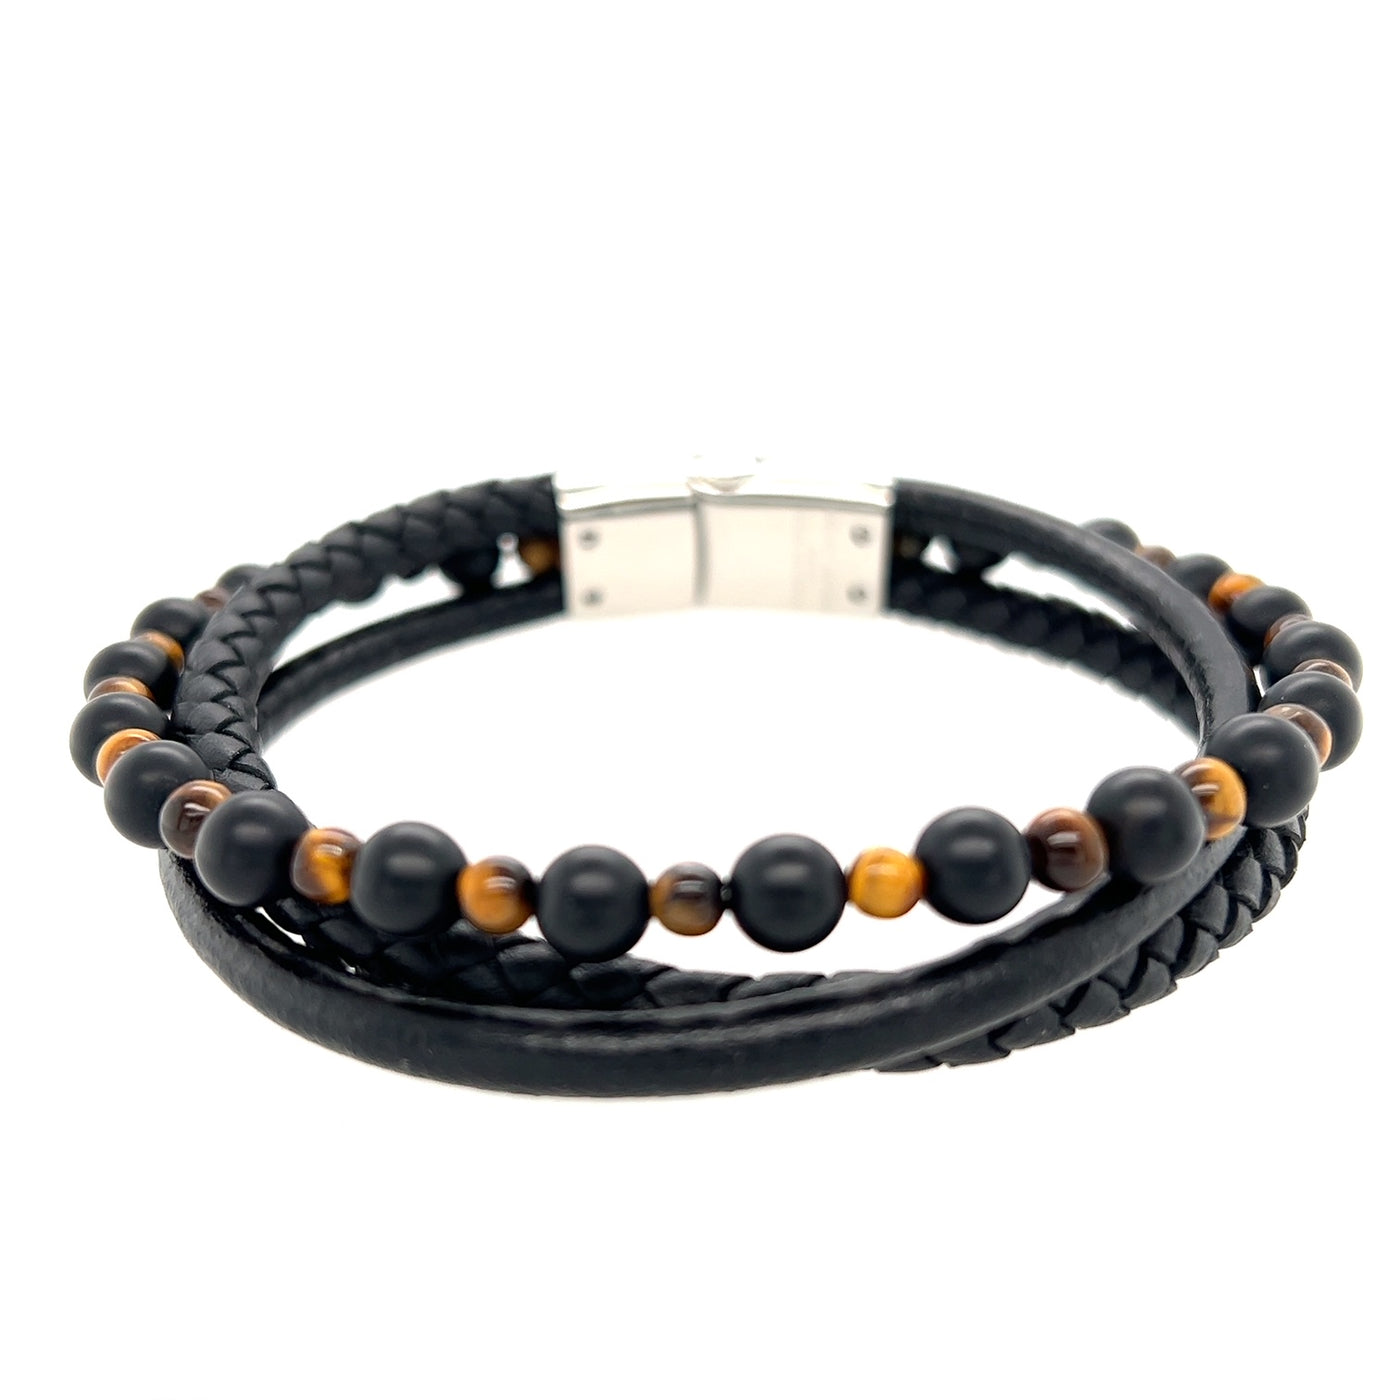 Stainless Steel Leather and Bead Stone Bracelet